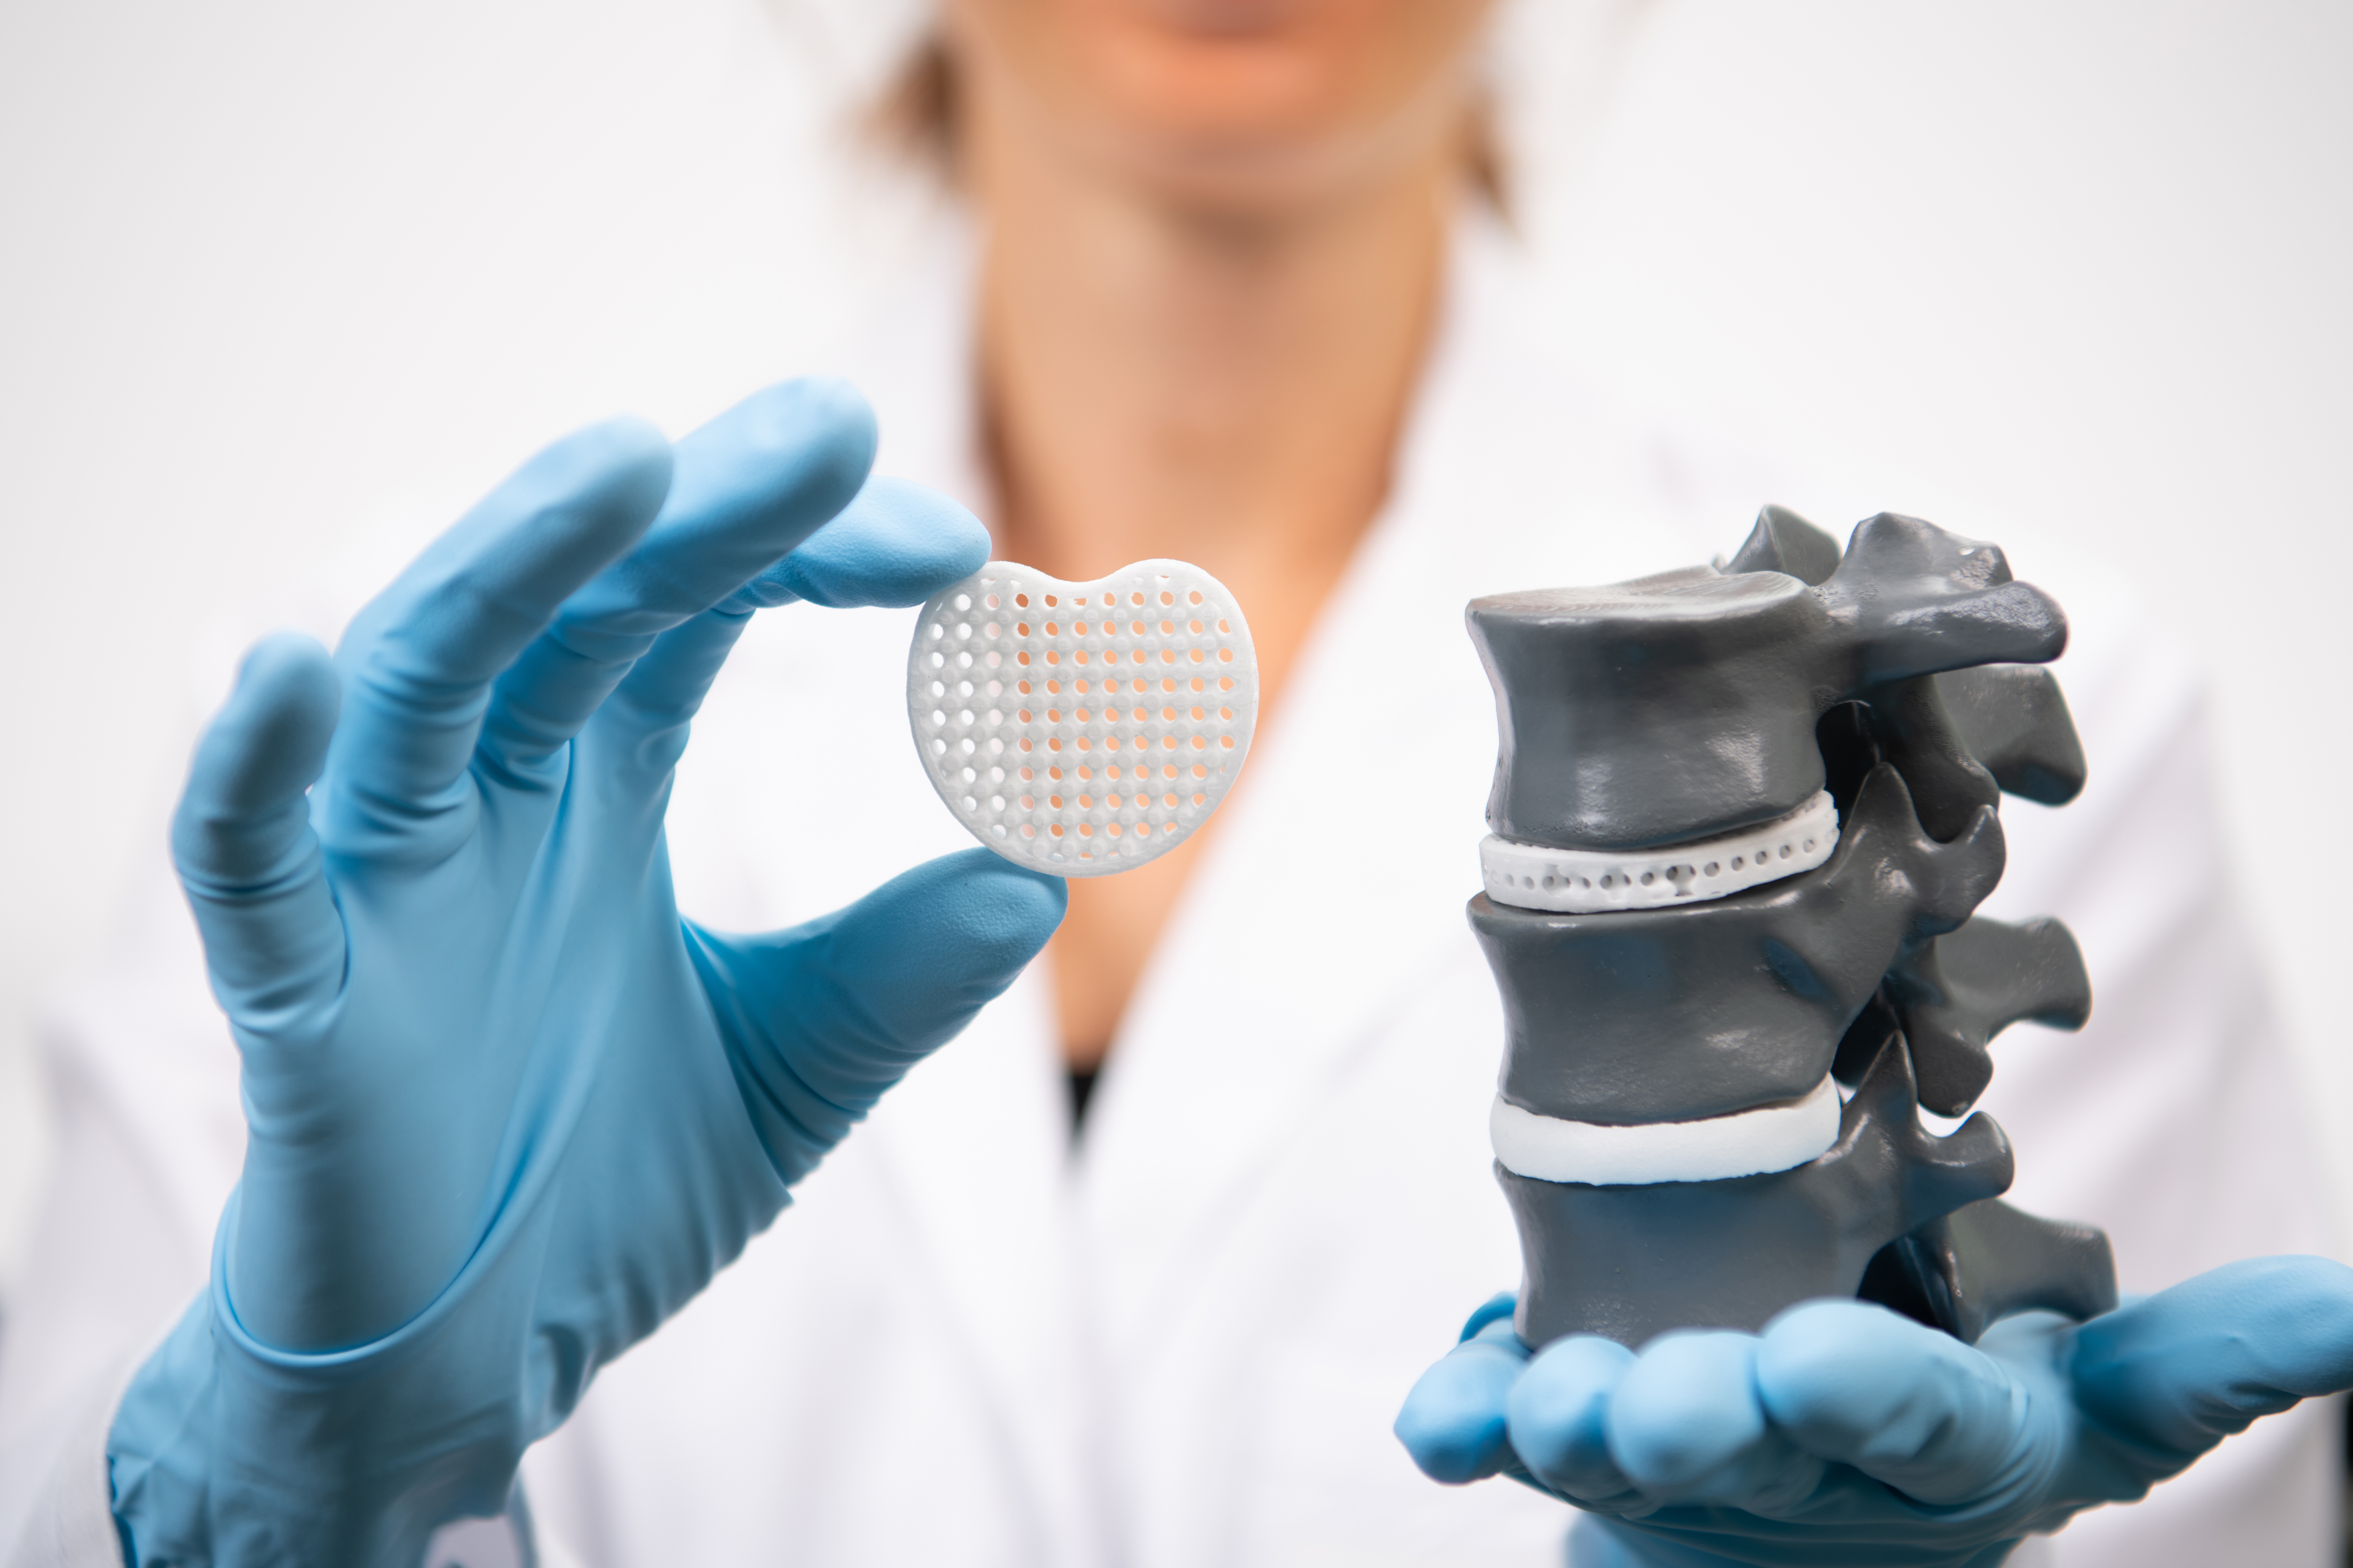 Evonik now offers customizable RESOMER® PrintPowder for 3D printing of personalized, implantable medical devices